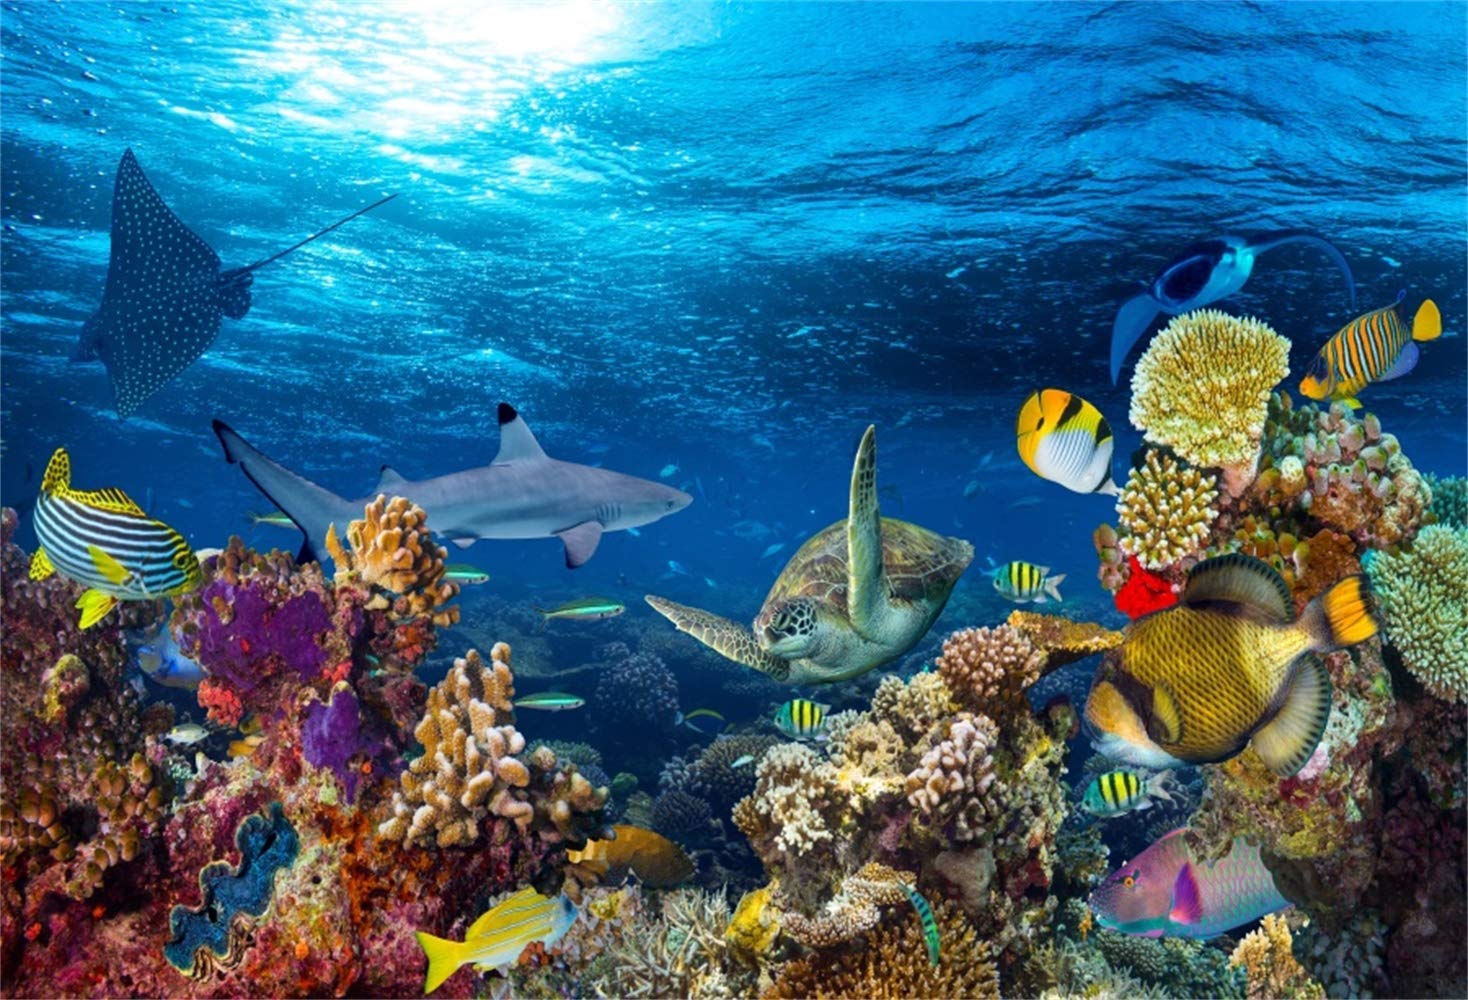 MMPTn 9x6ft Coral and Fish in The Sea Backdrop Aquarium Underwater Seascape Photography Background Marin Ocean Diving Atoll Reef Summer Photo Studio Props Kid Boy Girl Artistic Portrait Wallpaper Online